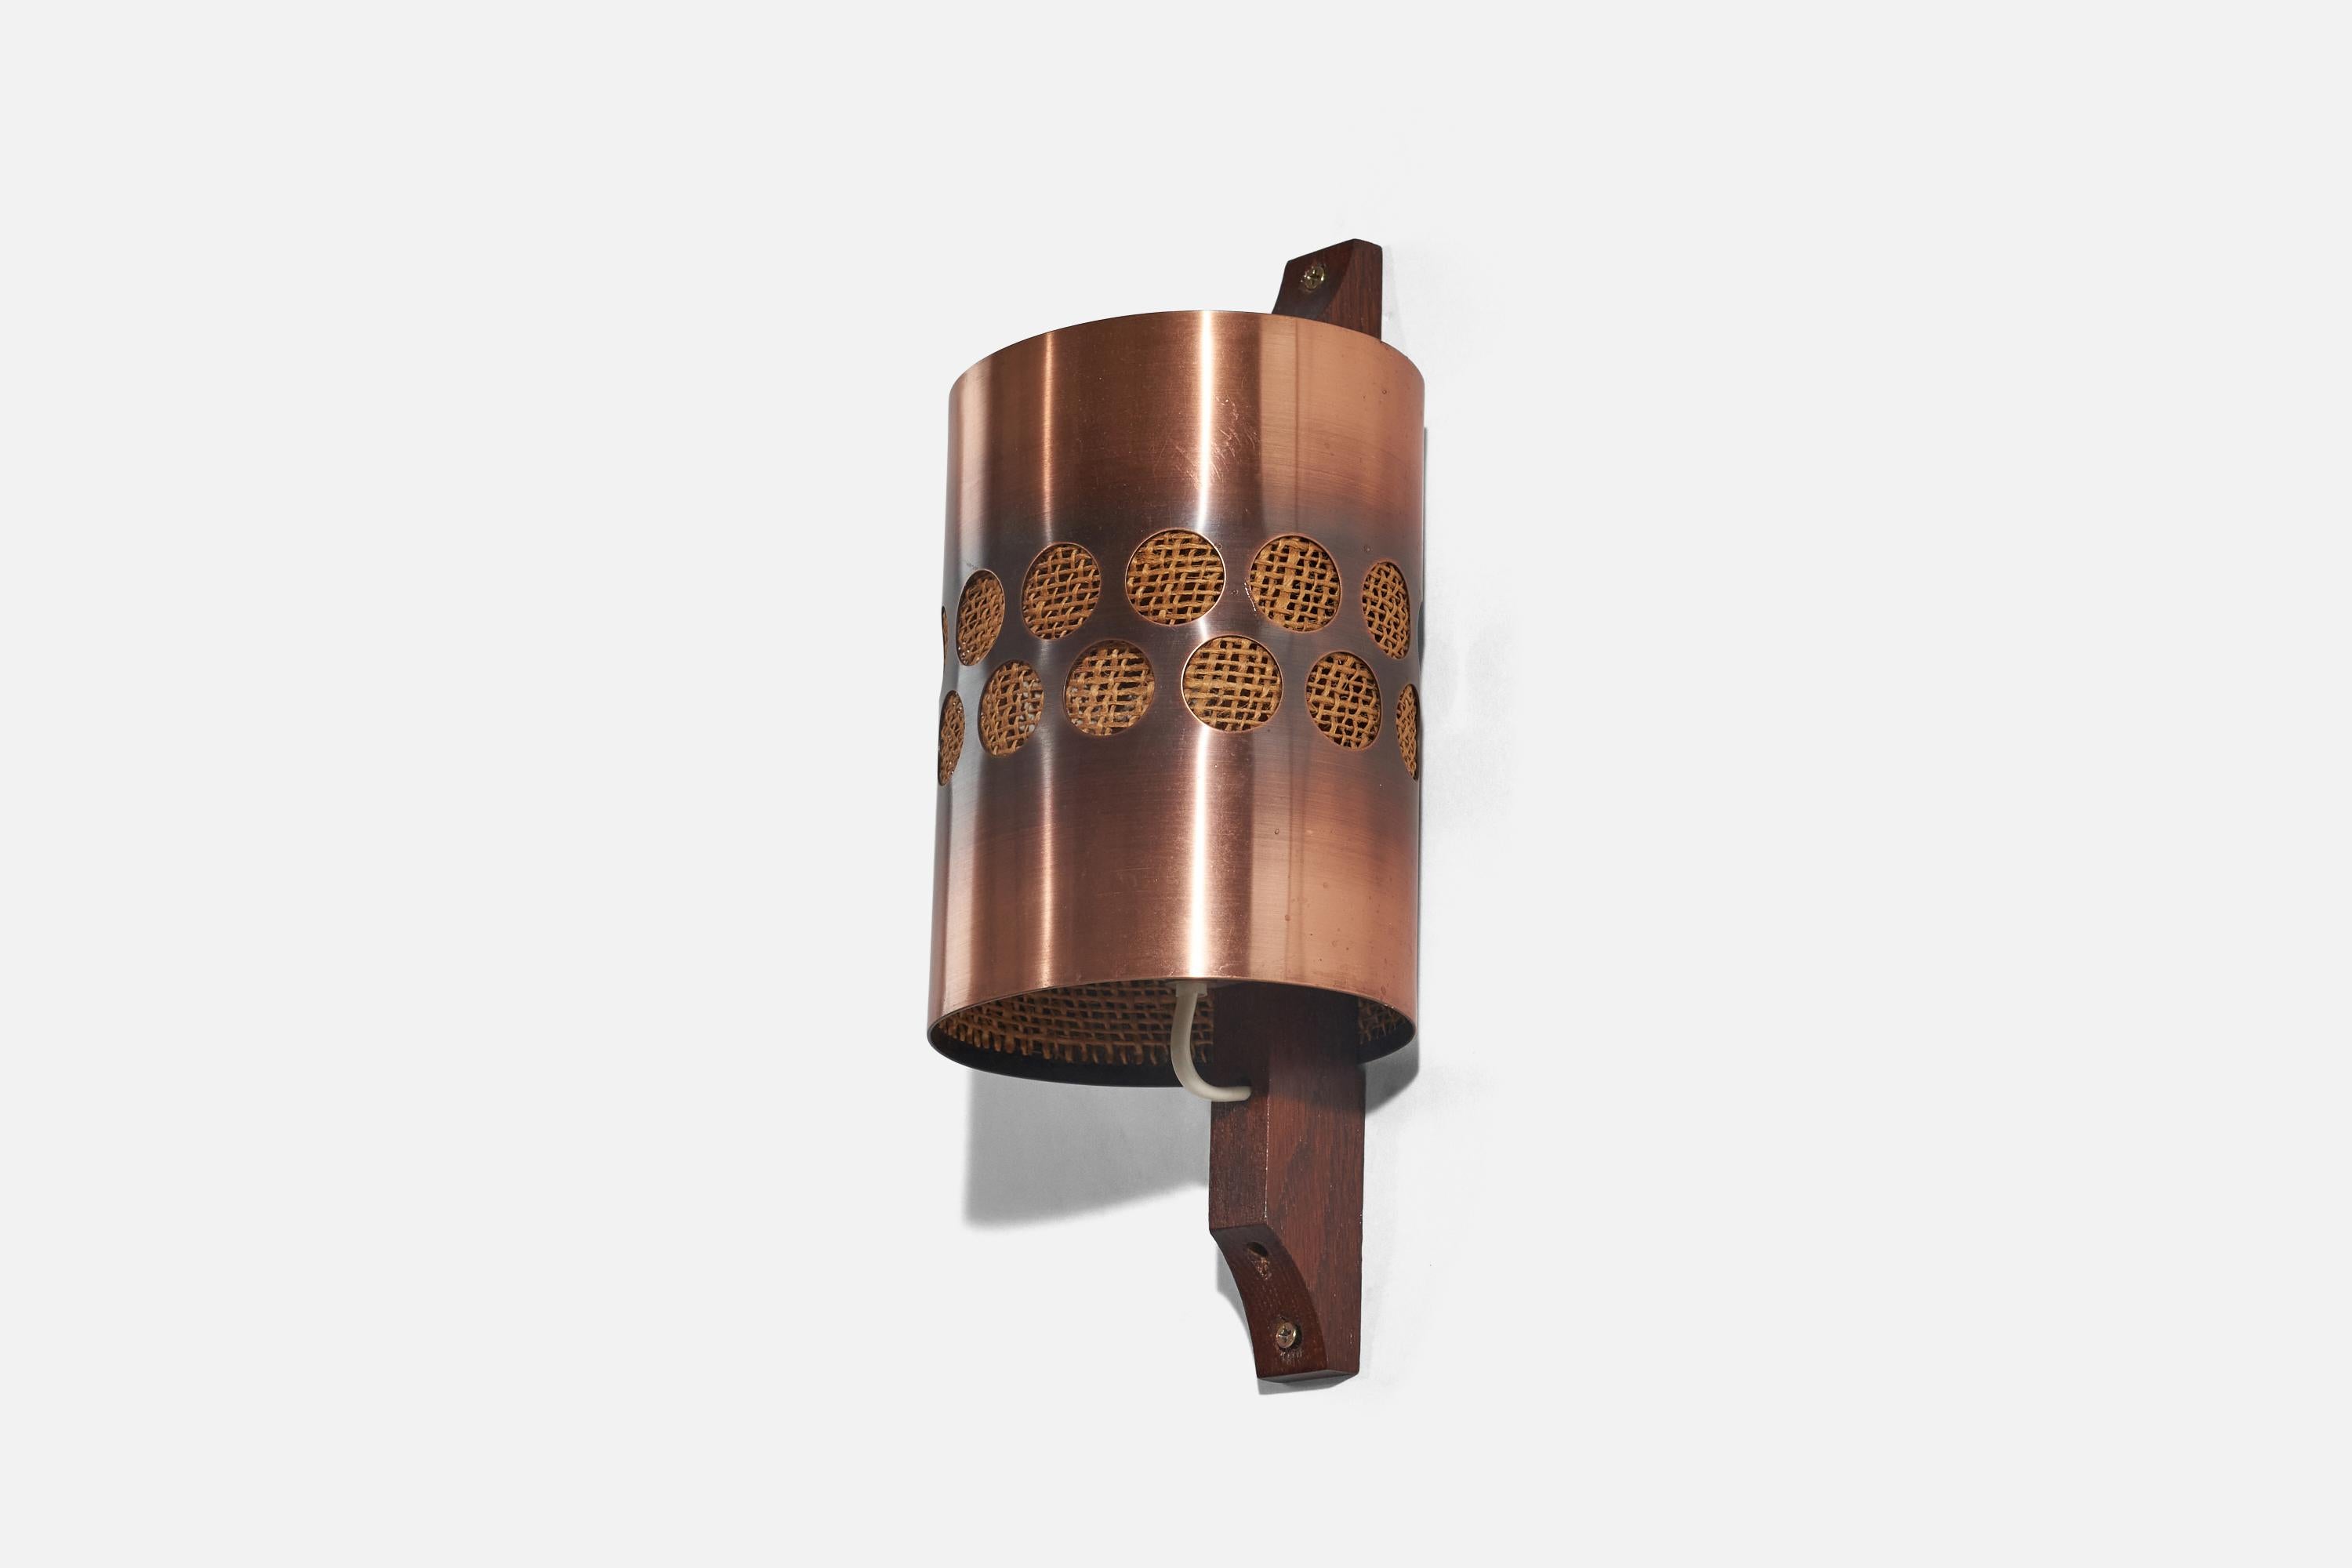 An oak, copper and raffia wall light designed and produced by Nils H. Ledung, Sweden, 1960s.

Fixture is set as a hardwire or plug-in. 
Socket takes E-14 bulb.
There is no maximum wattage stated on the fixture. 